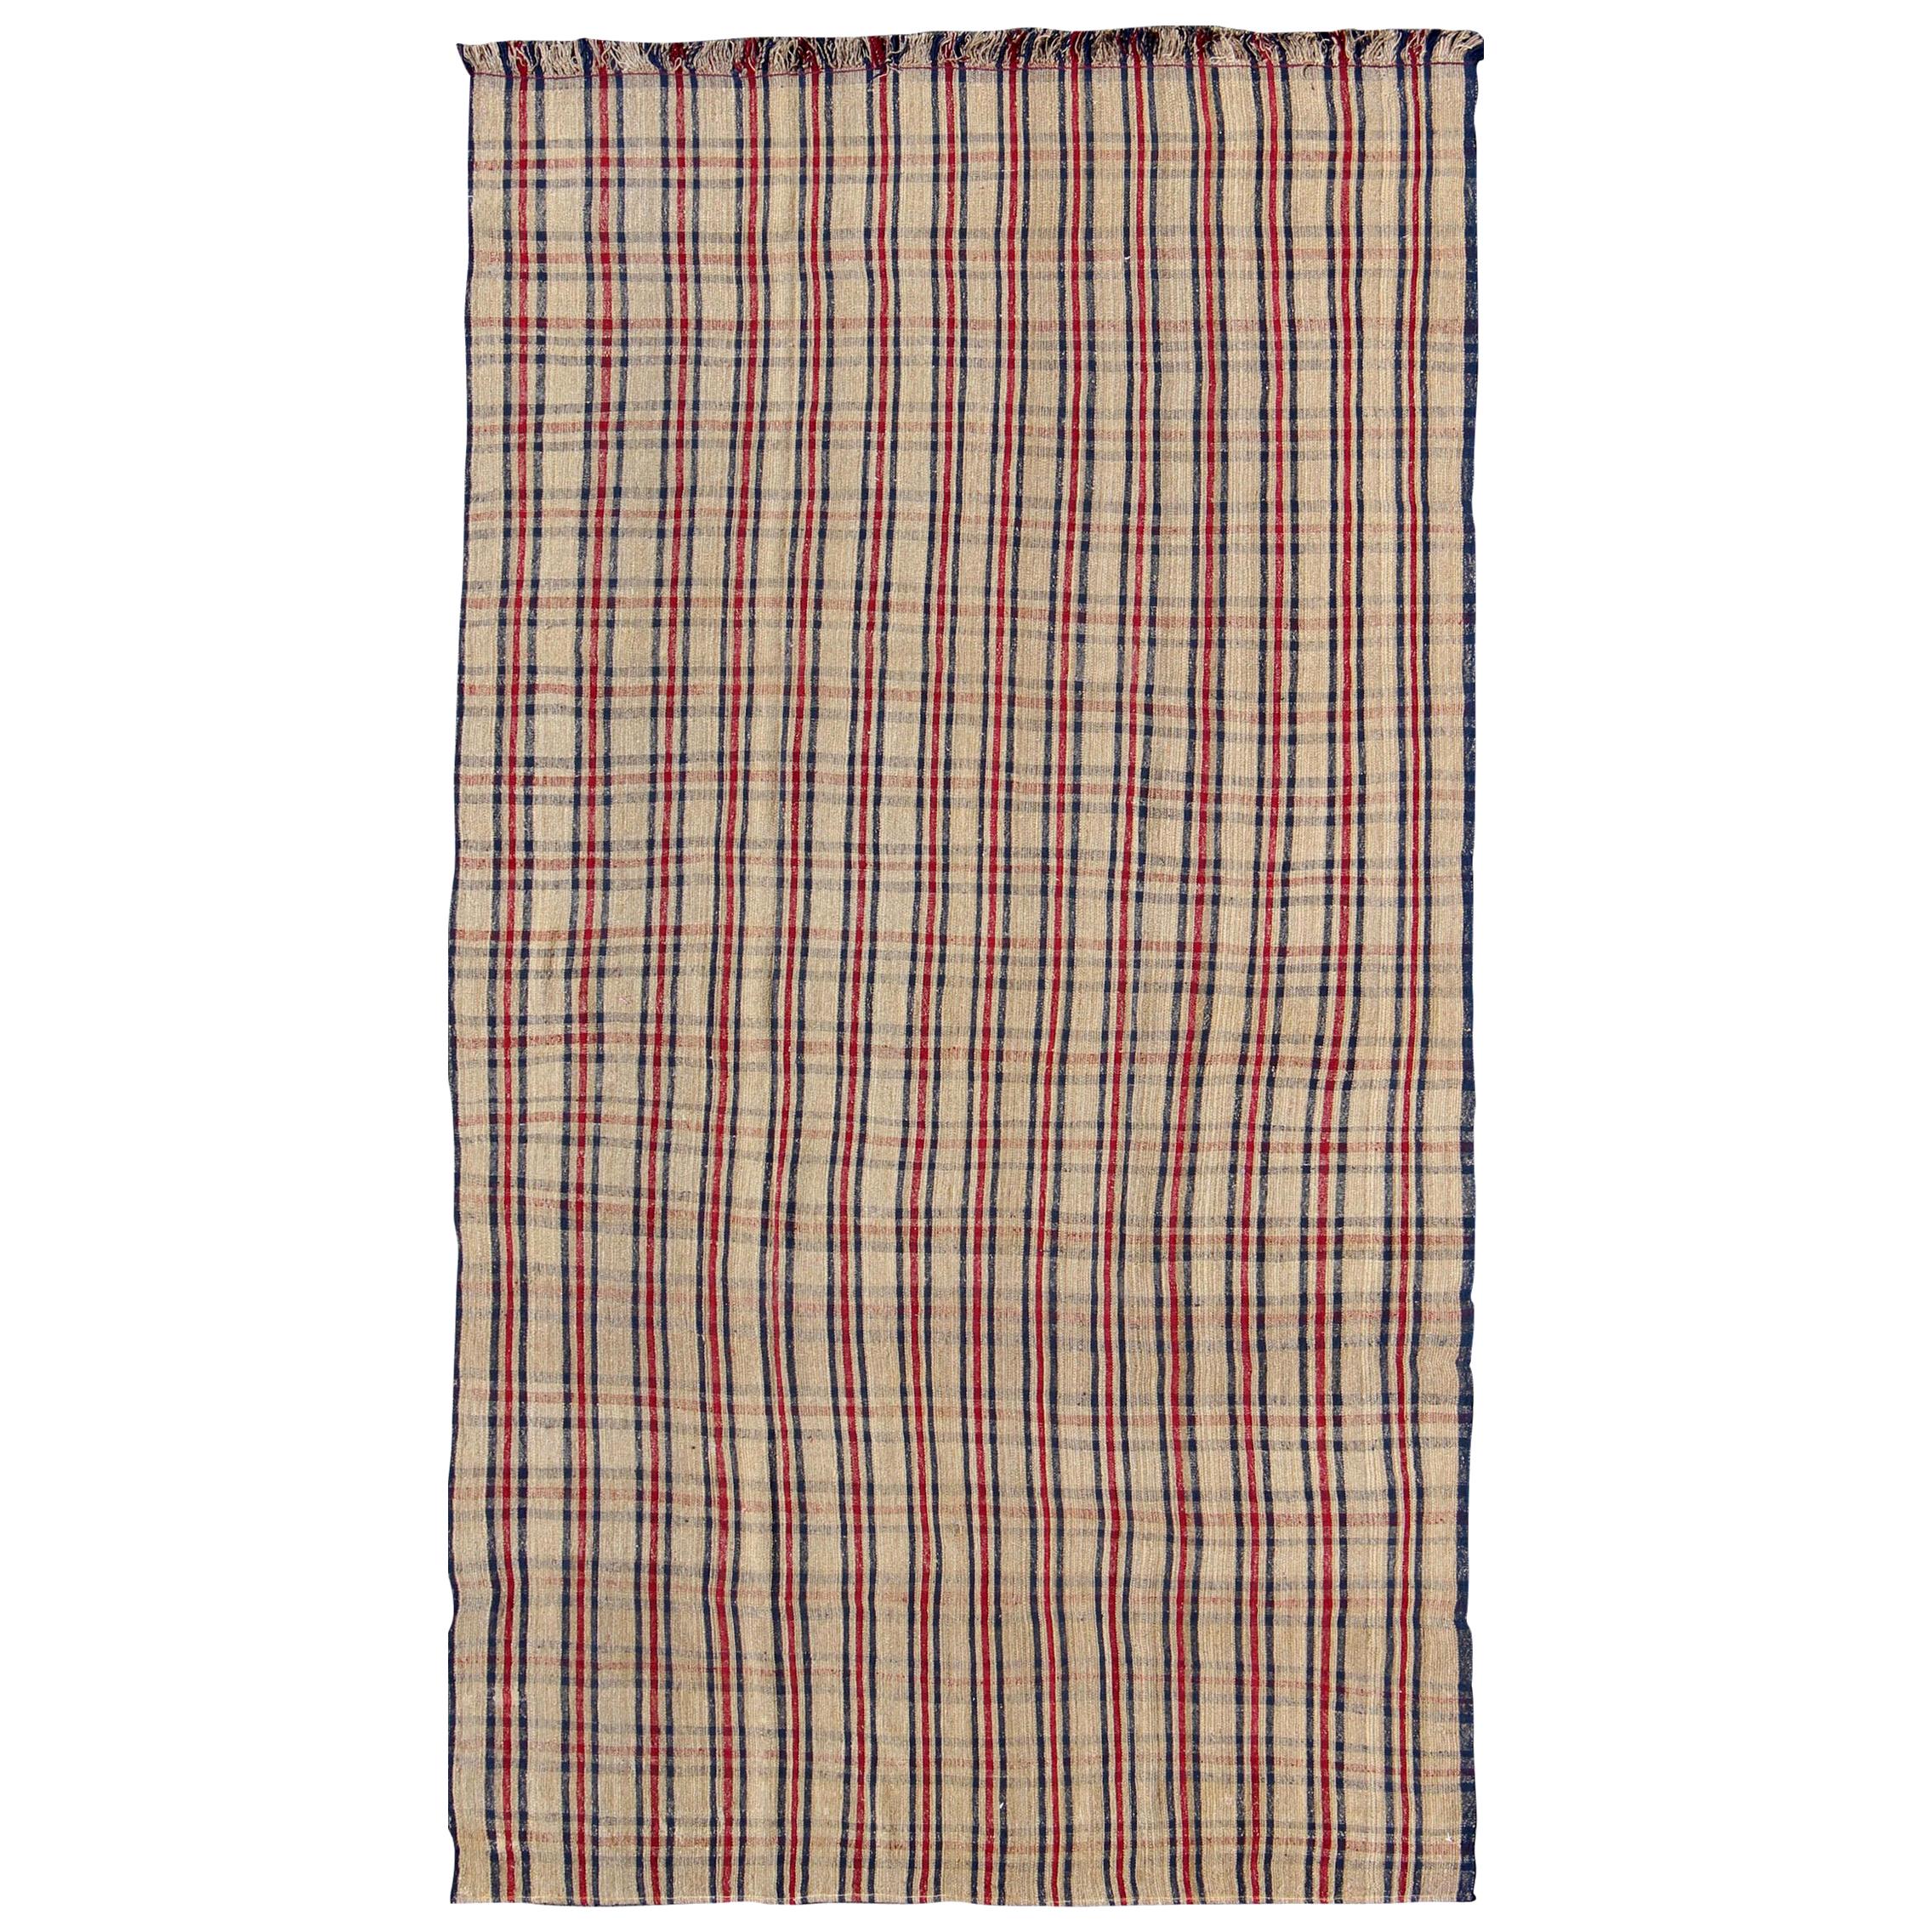 Plaid Design Vintage Turkish Kilim Rug with Stripes in Red, Navy Blue and Cream For Sale